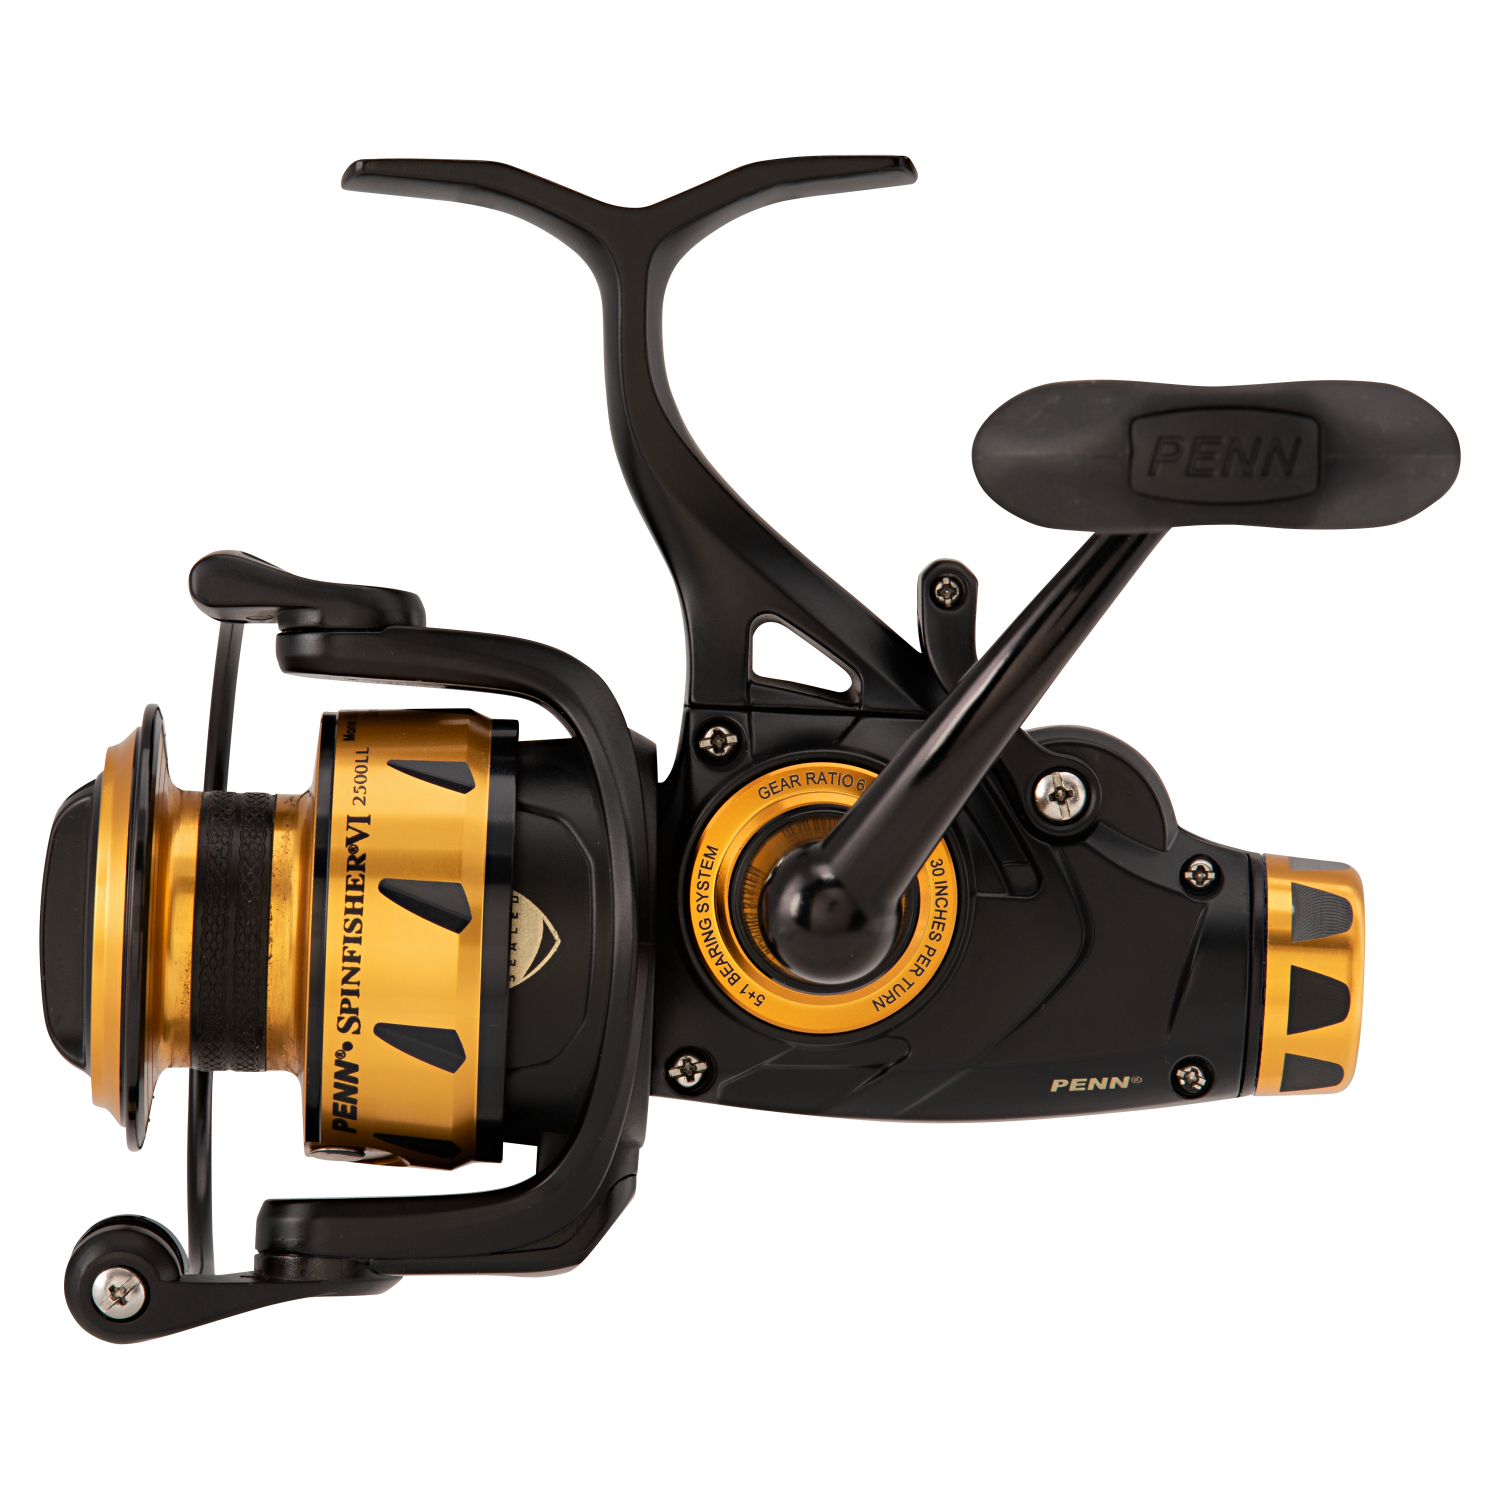 Penn Sea Fishing Reel Spinfisher VI Live Liner Spinning at low